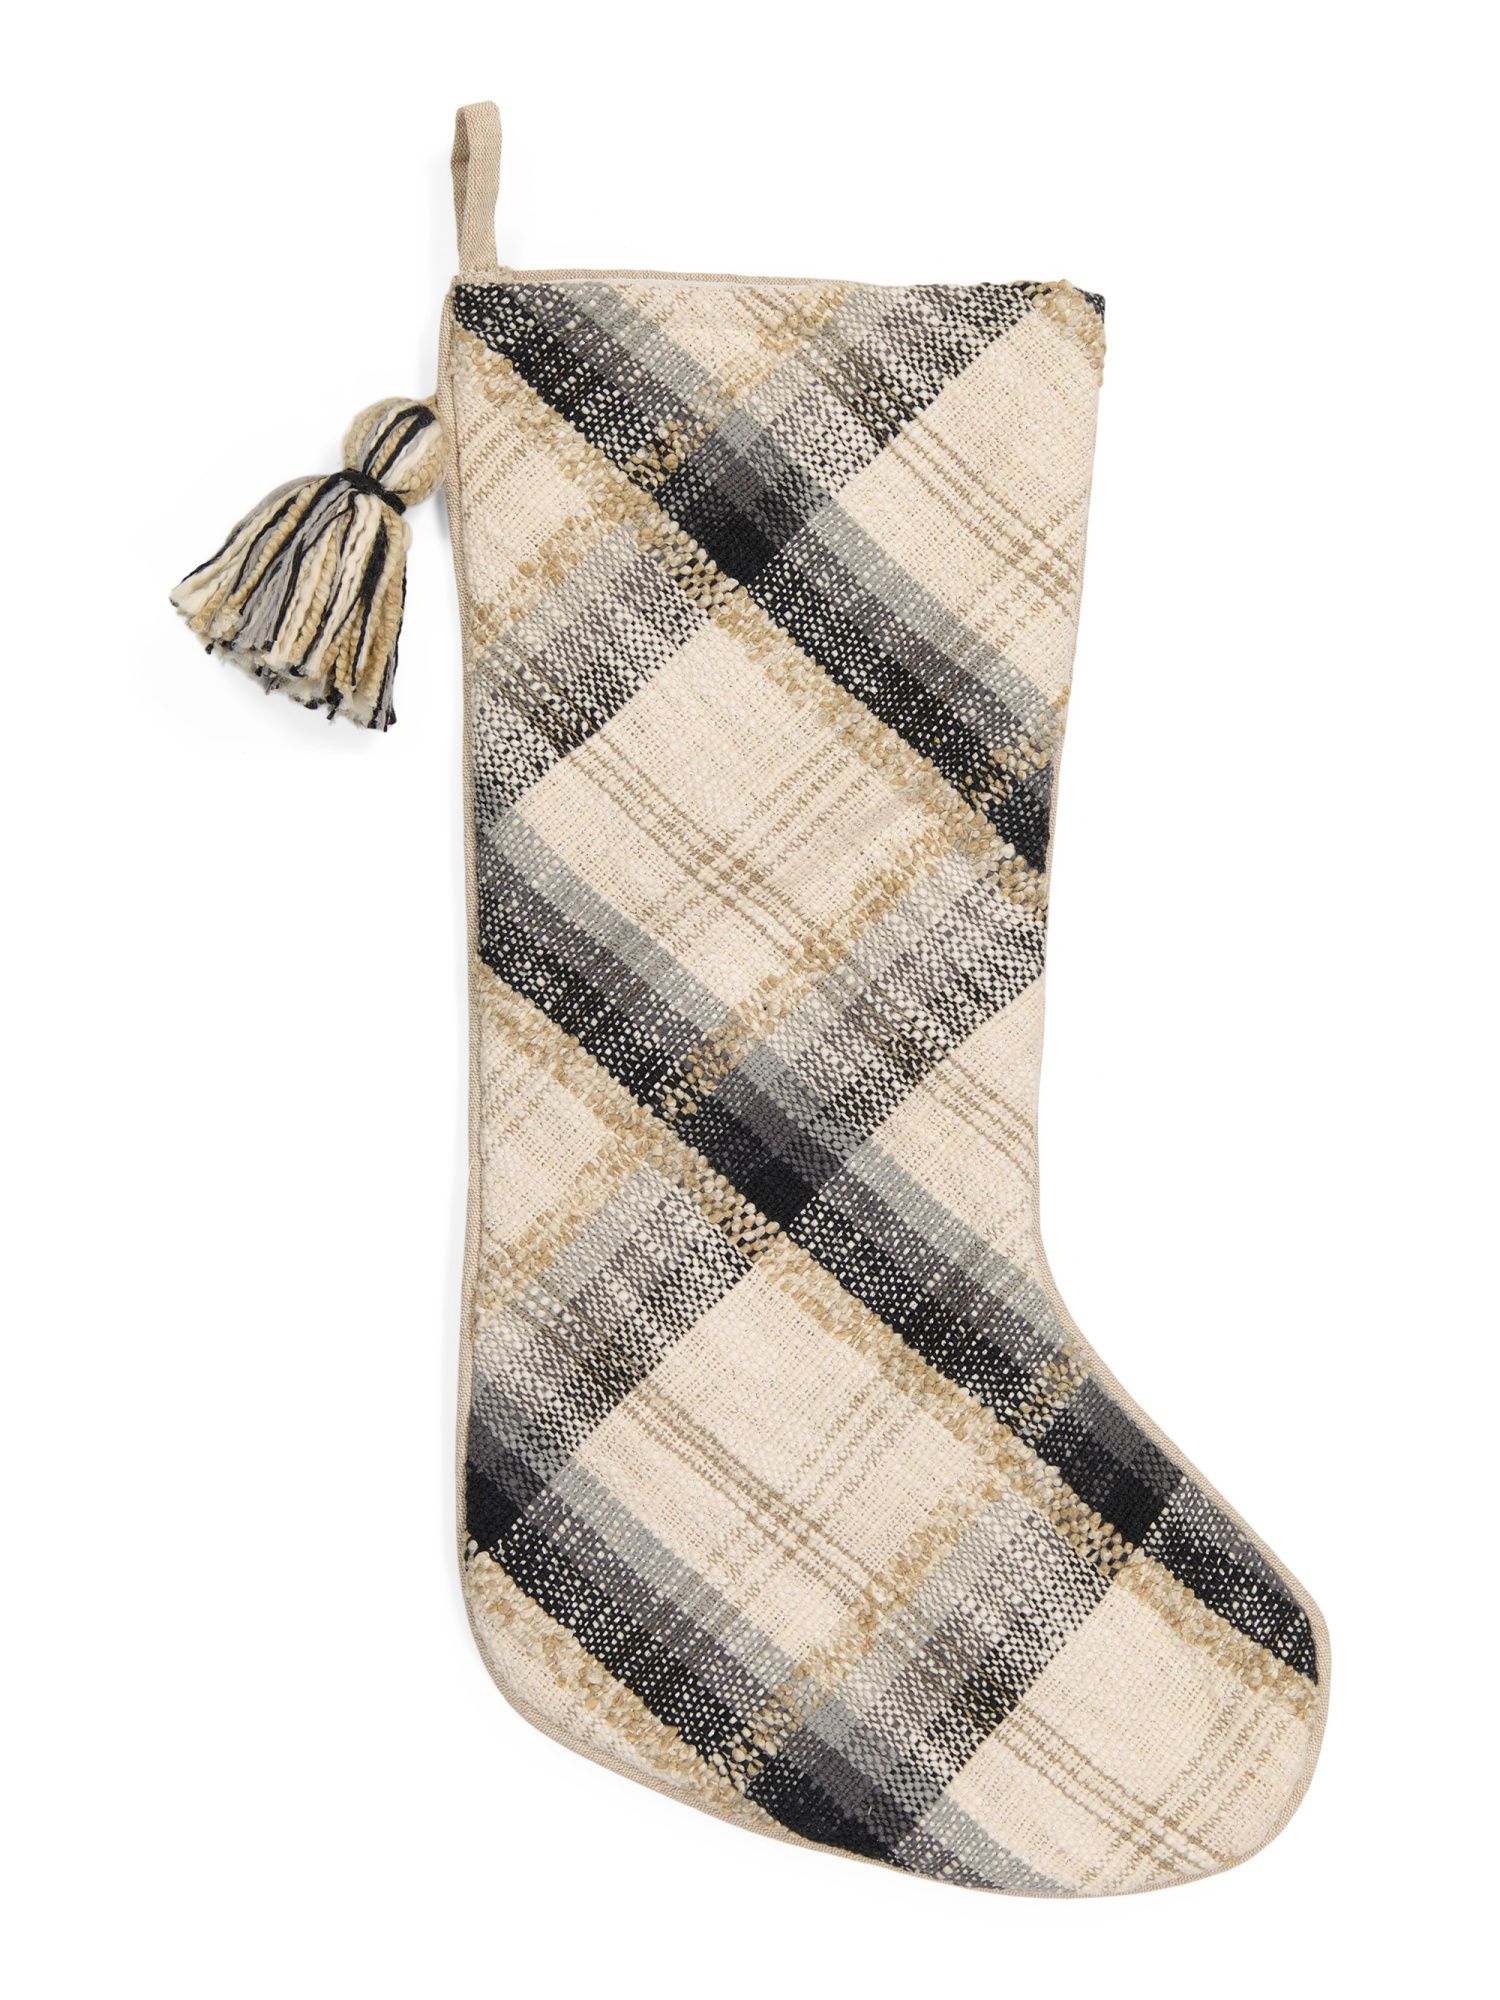 Textured Plaid Stocking With Tassel | Gifts For Home | Marshalls | Marshalls